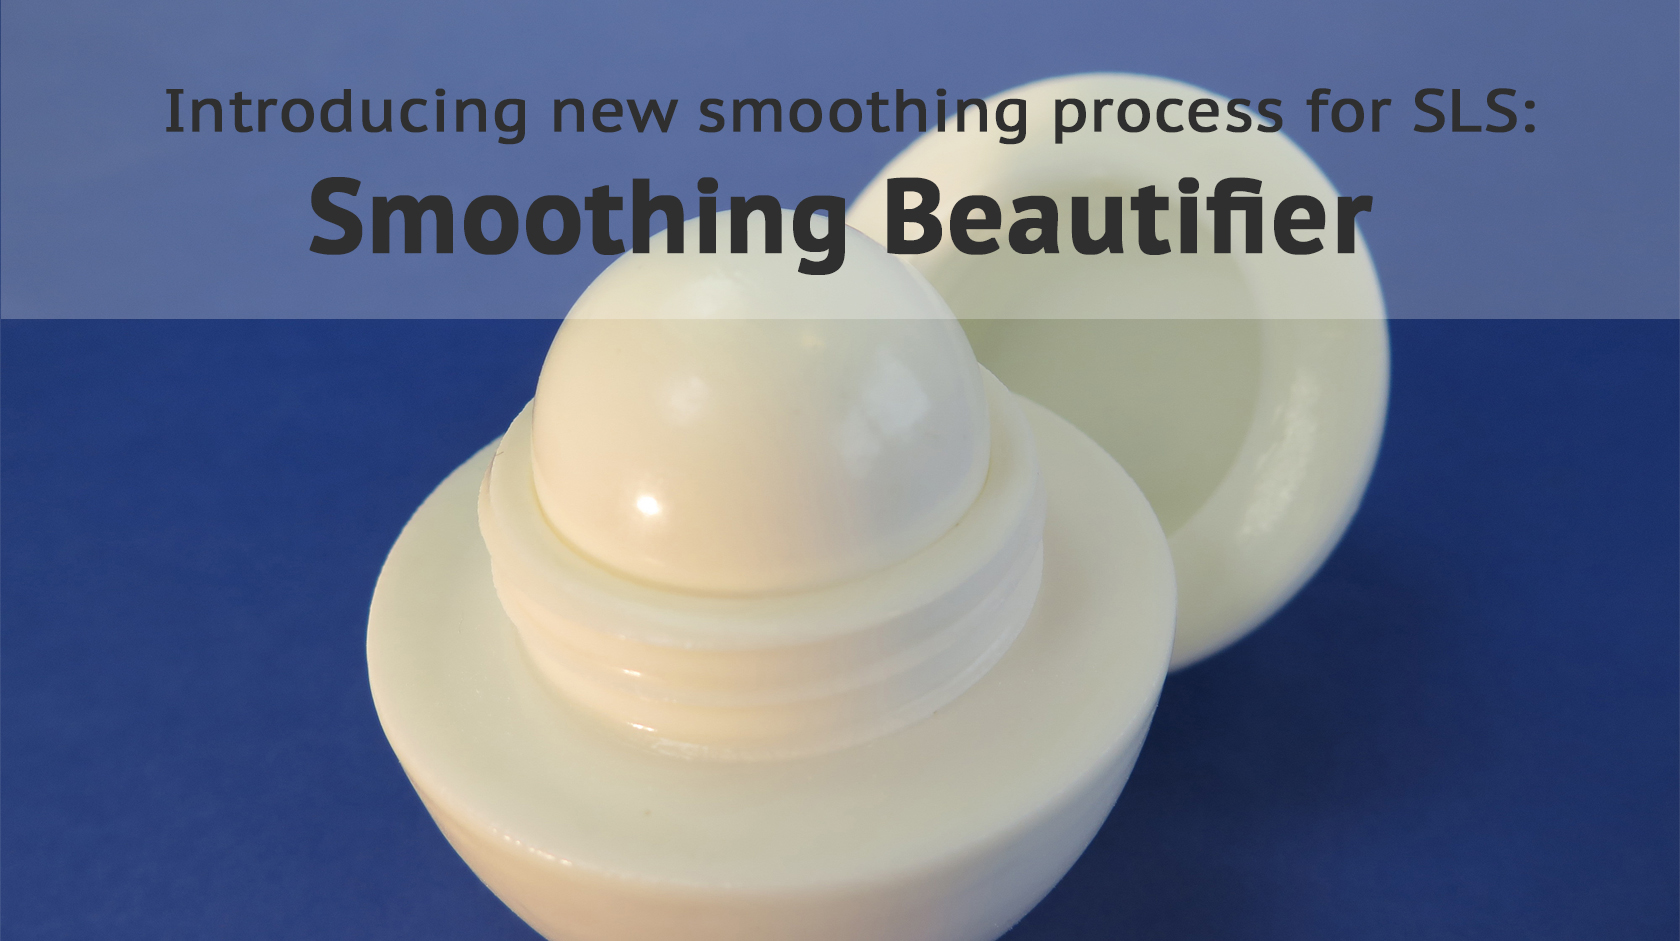 Introducing the Smoothing Beautifier: a new standard for high-quality 3D printed parts | Sculpteo Blog